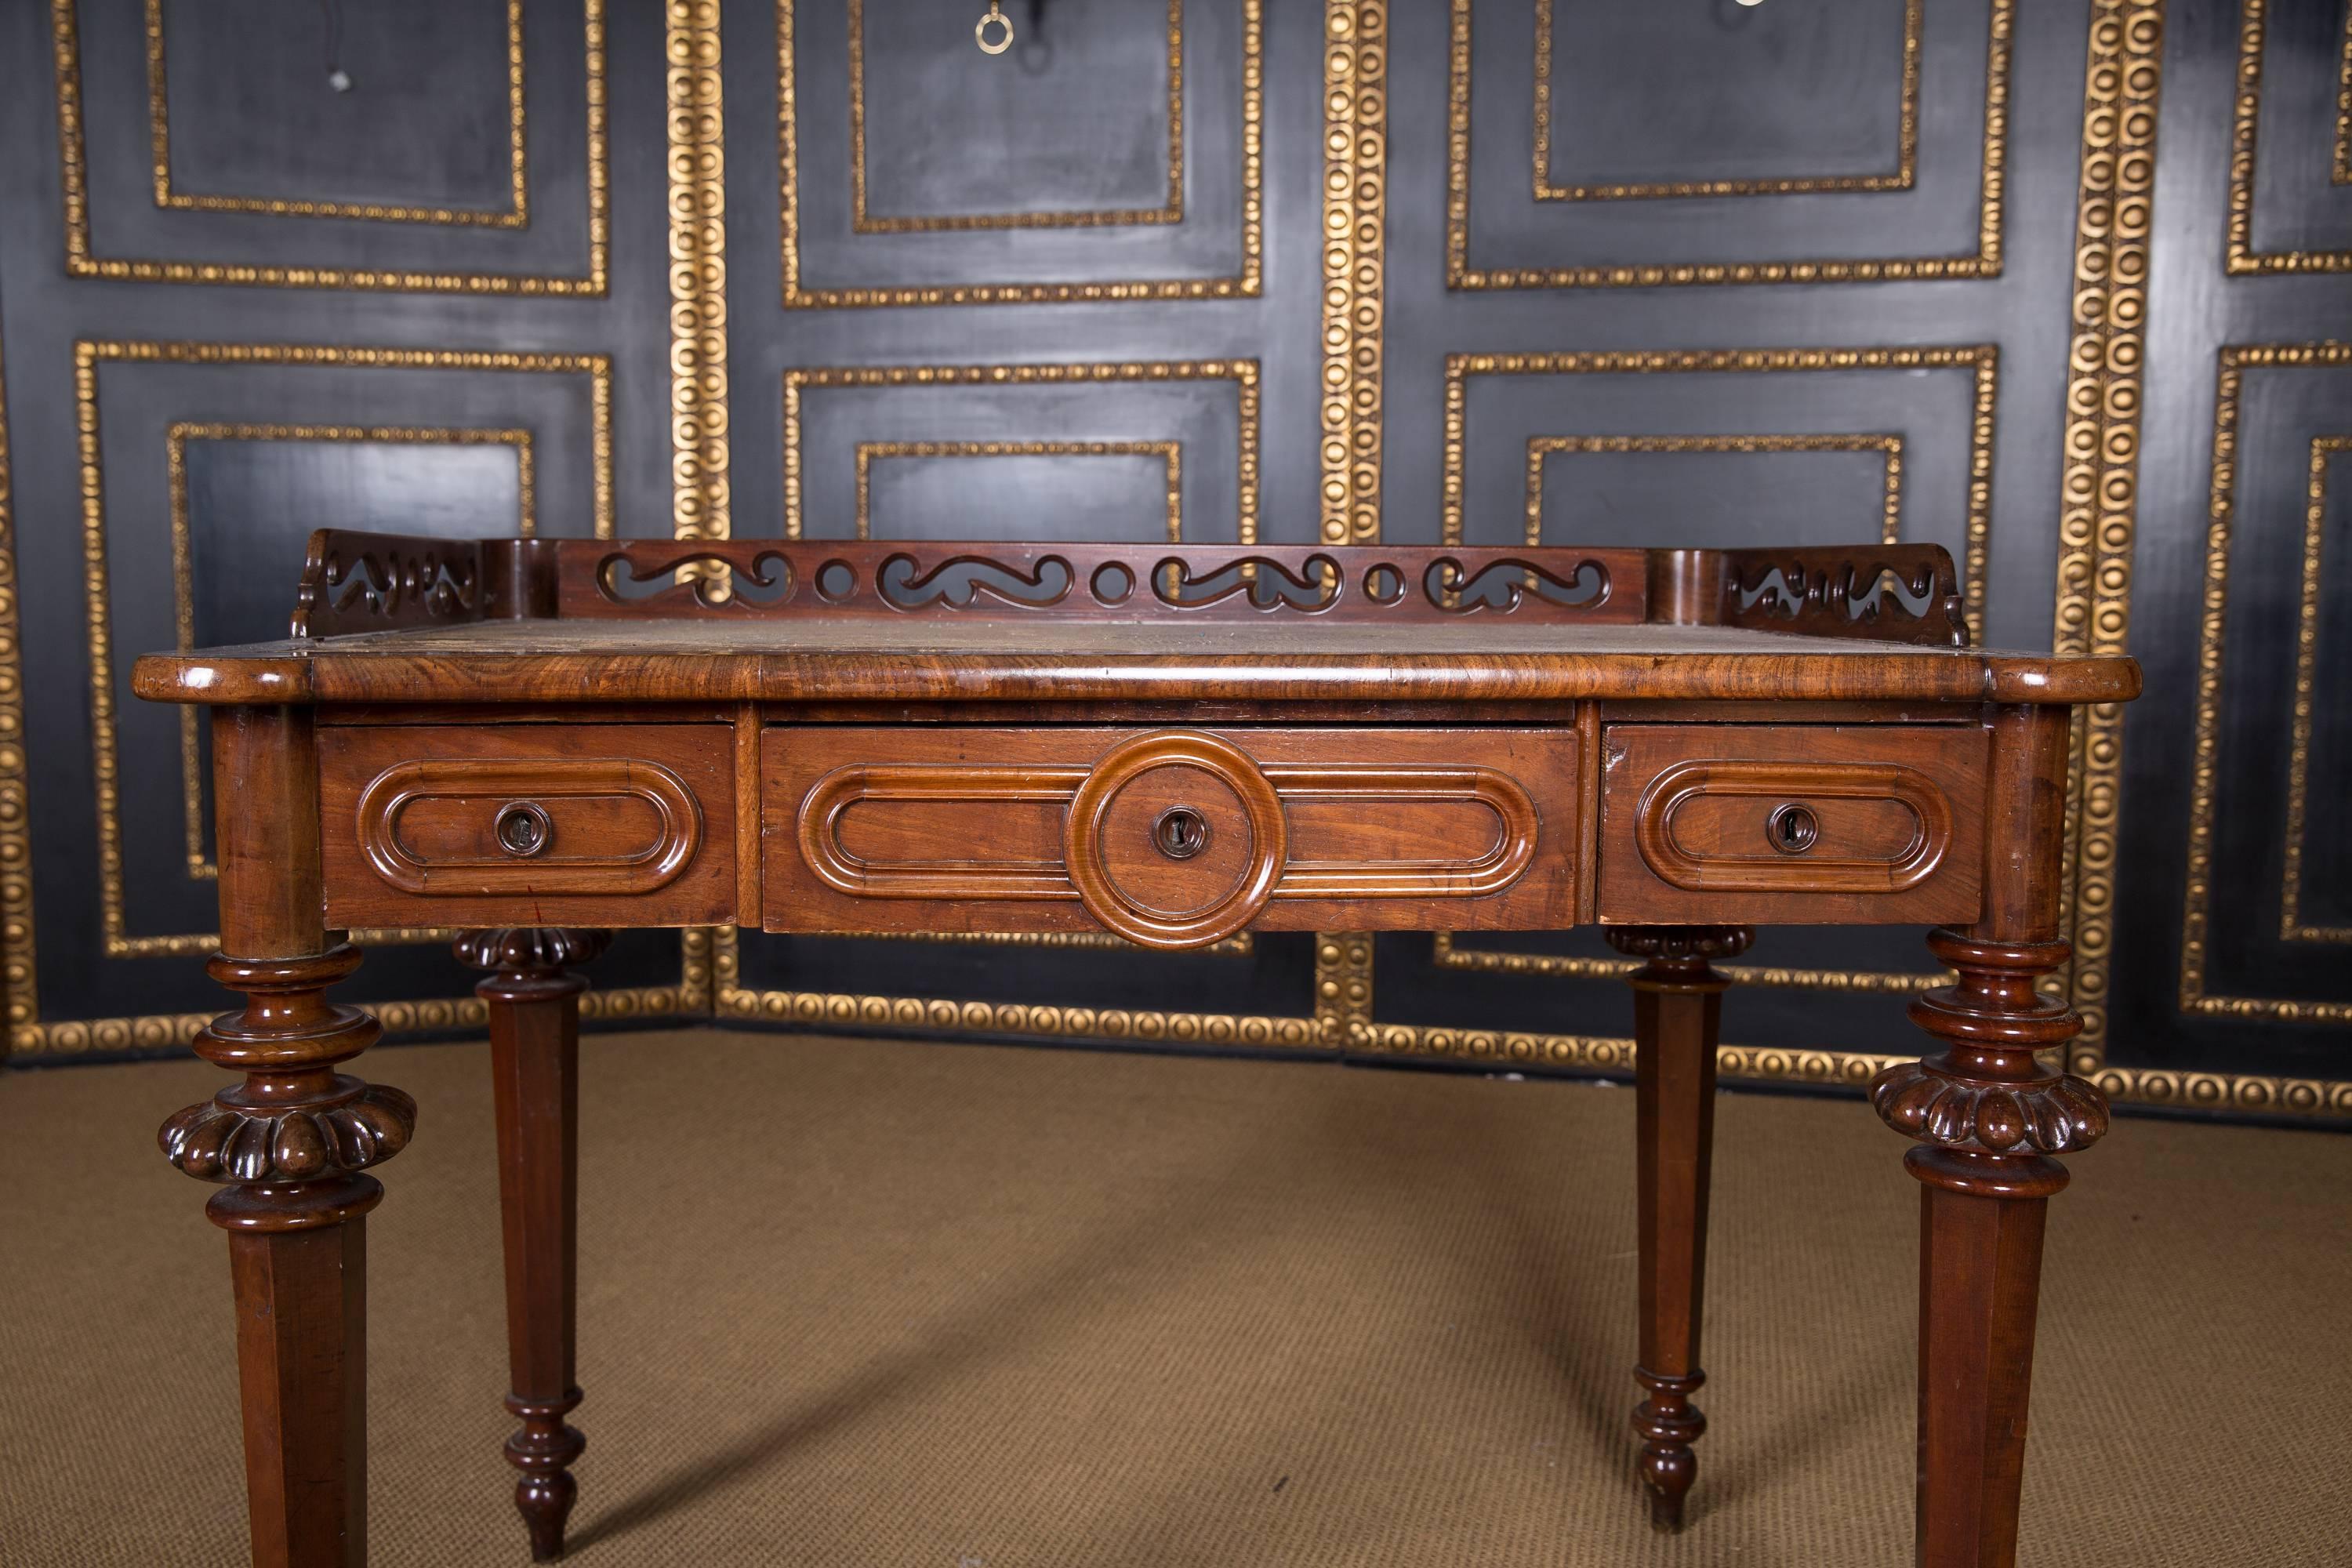 Mahogany on solid conifers. High knee pocket on the front with finely worked drawers, slightly protruding top plate, on high and fine-edged ball-shaped columns. Finally perforated gallery border.

A good historical condition with a beautiful warm